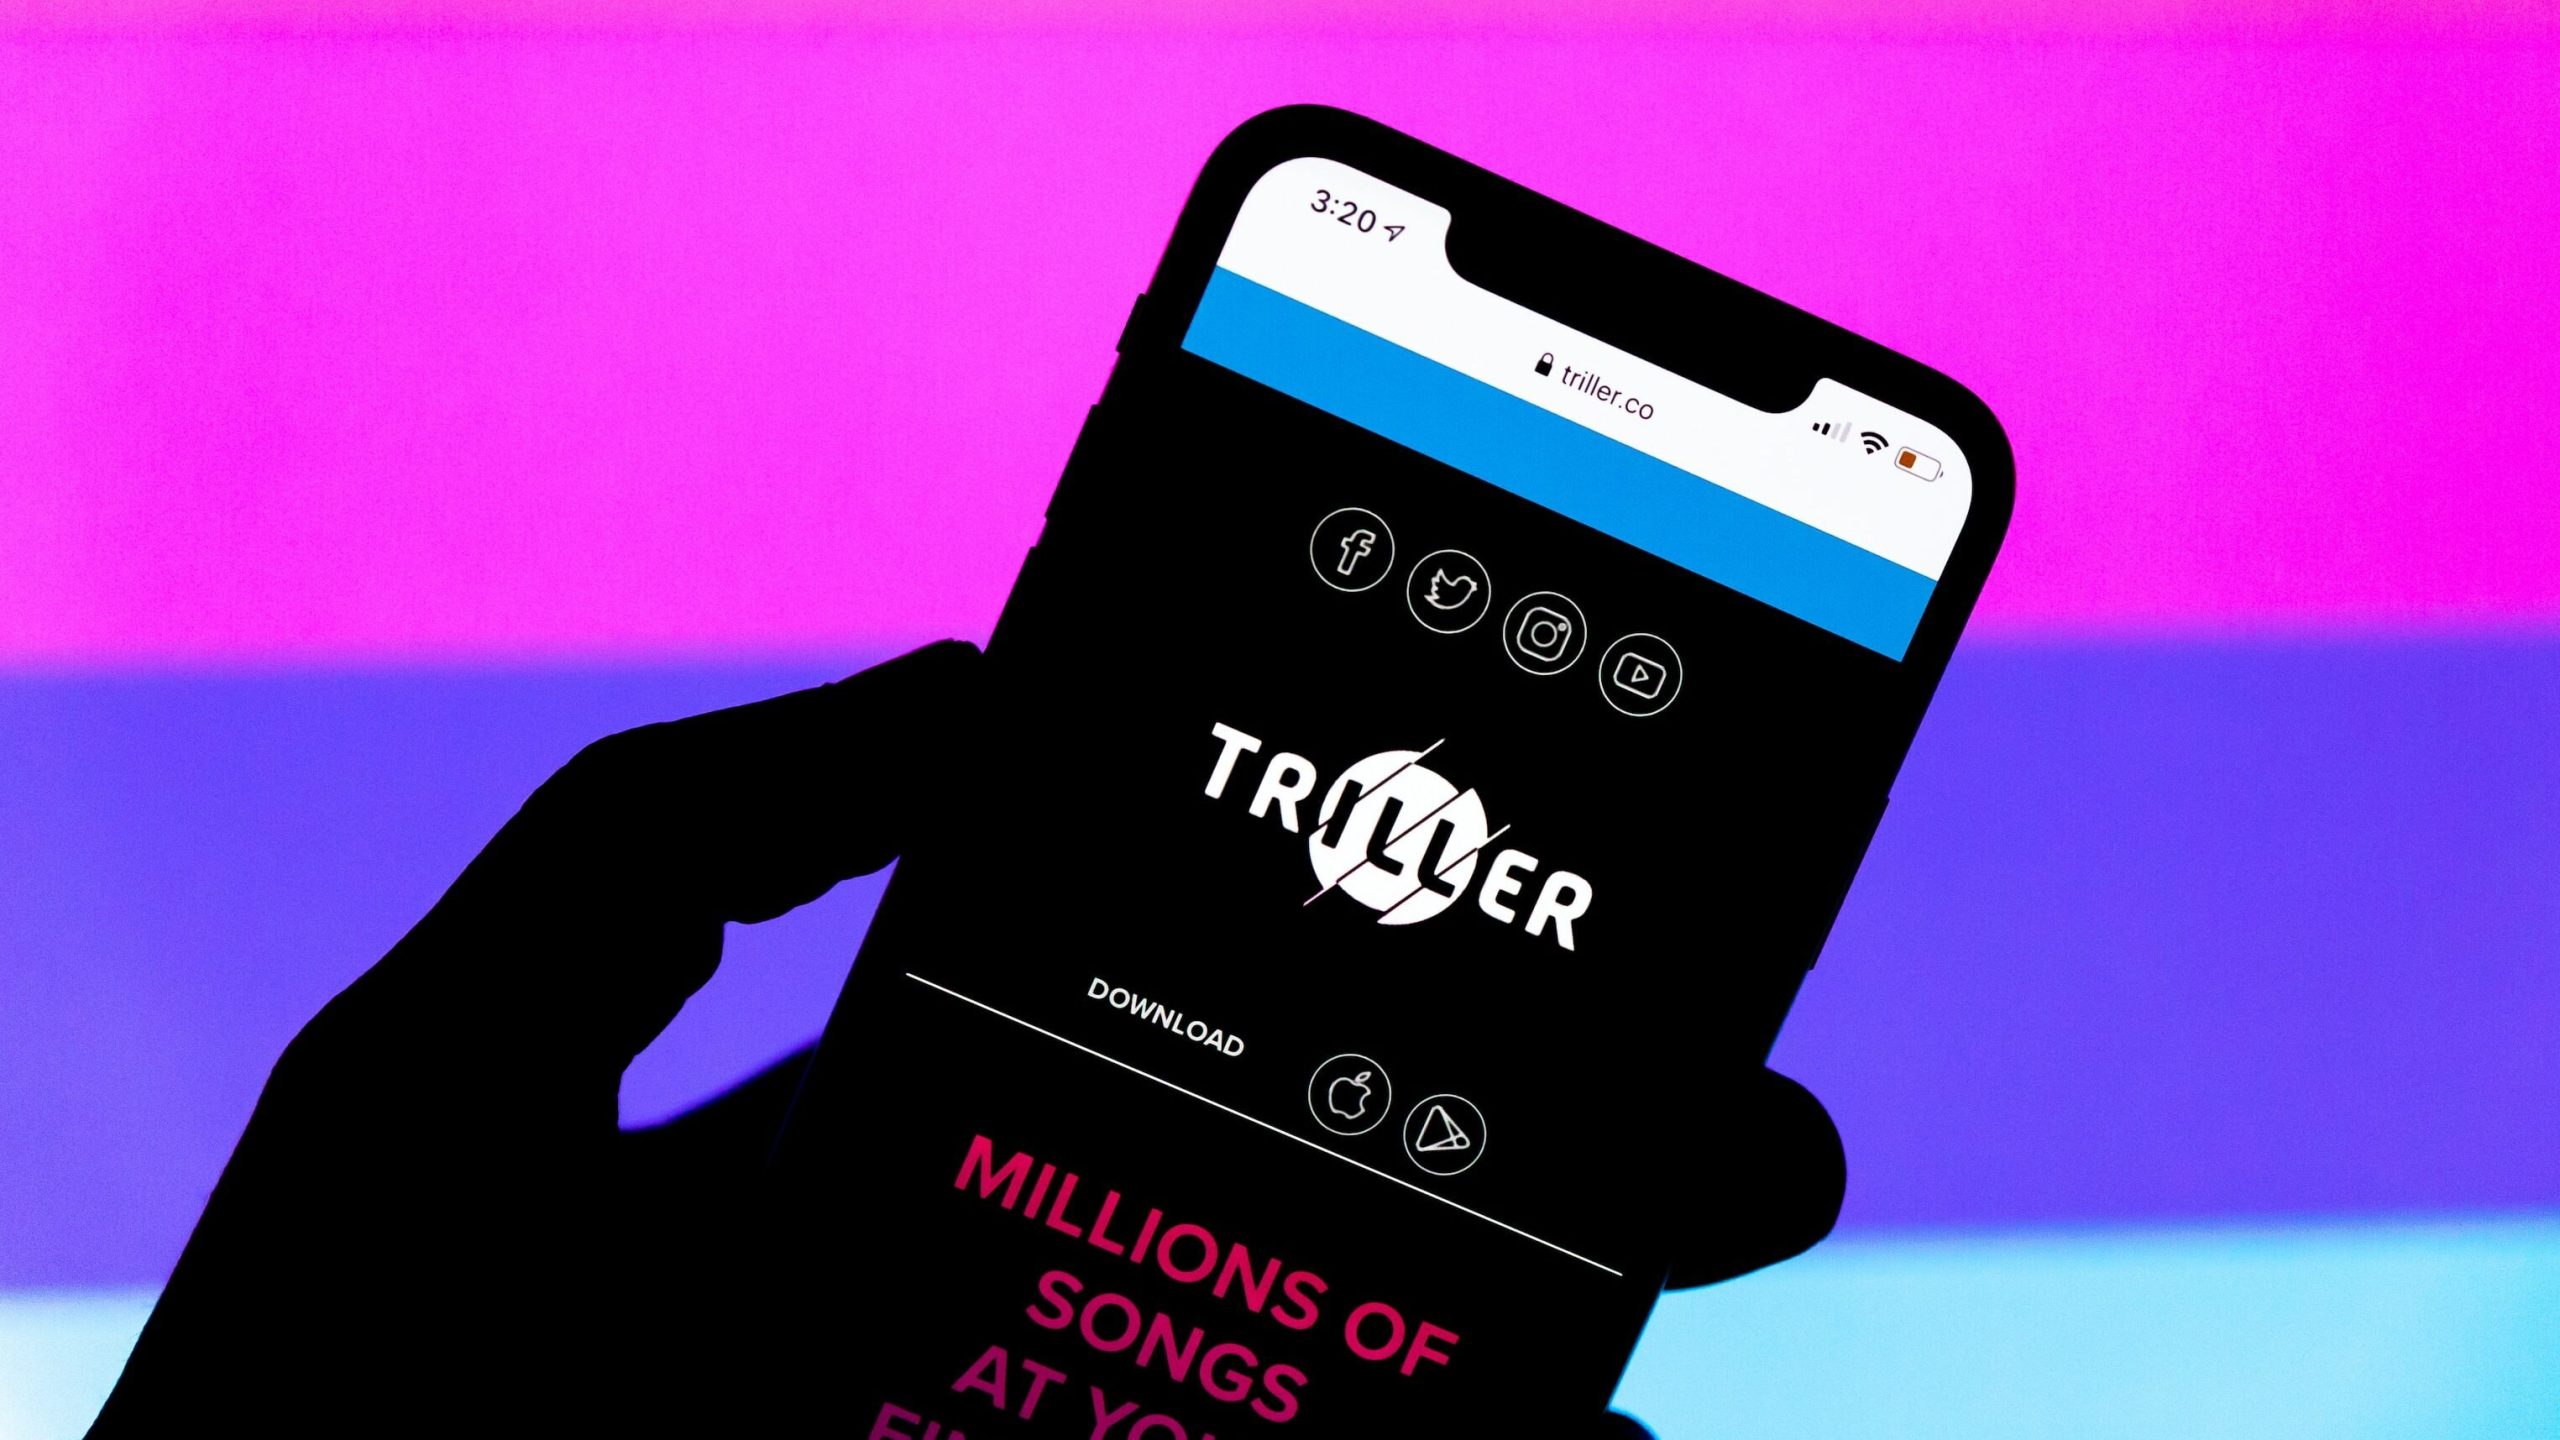 TikTok rival Triller to merge with NASDAQ-listed AGBA, creating $4 billion social media and financial services company